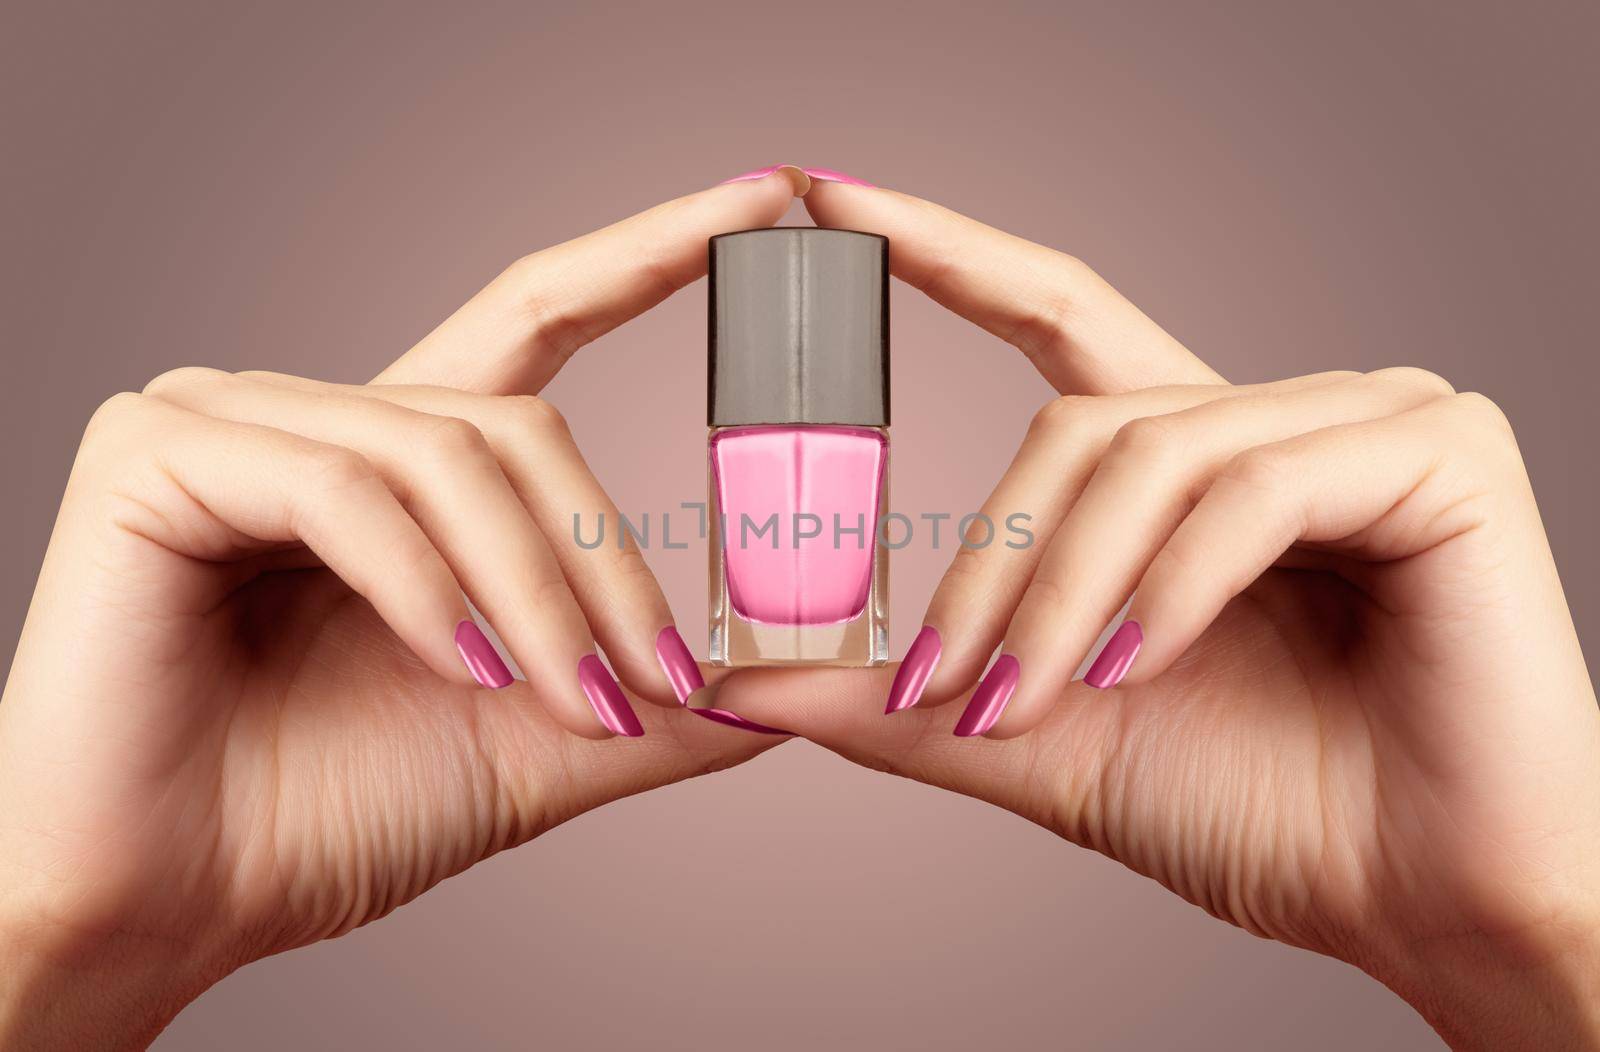 Manicured nails with pastel nail polish. Manicure with bright nailpolish. Fashion manicure. Shiny gel lacquer in bottle. Beautiful female hands with pink bottle on beige background